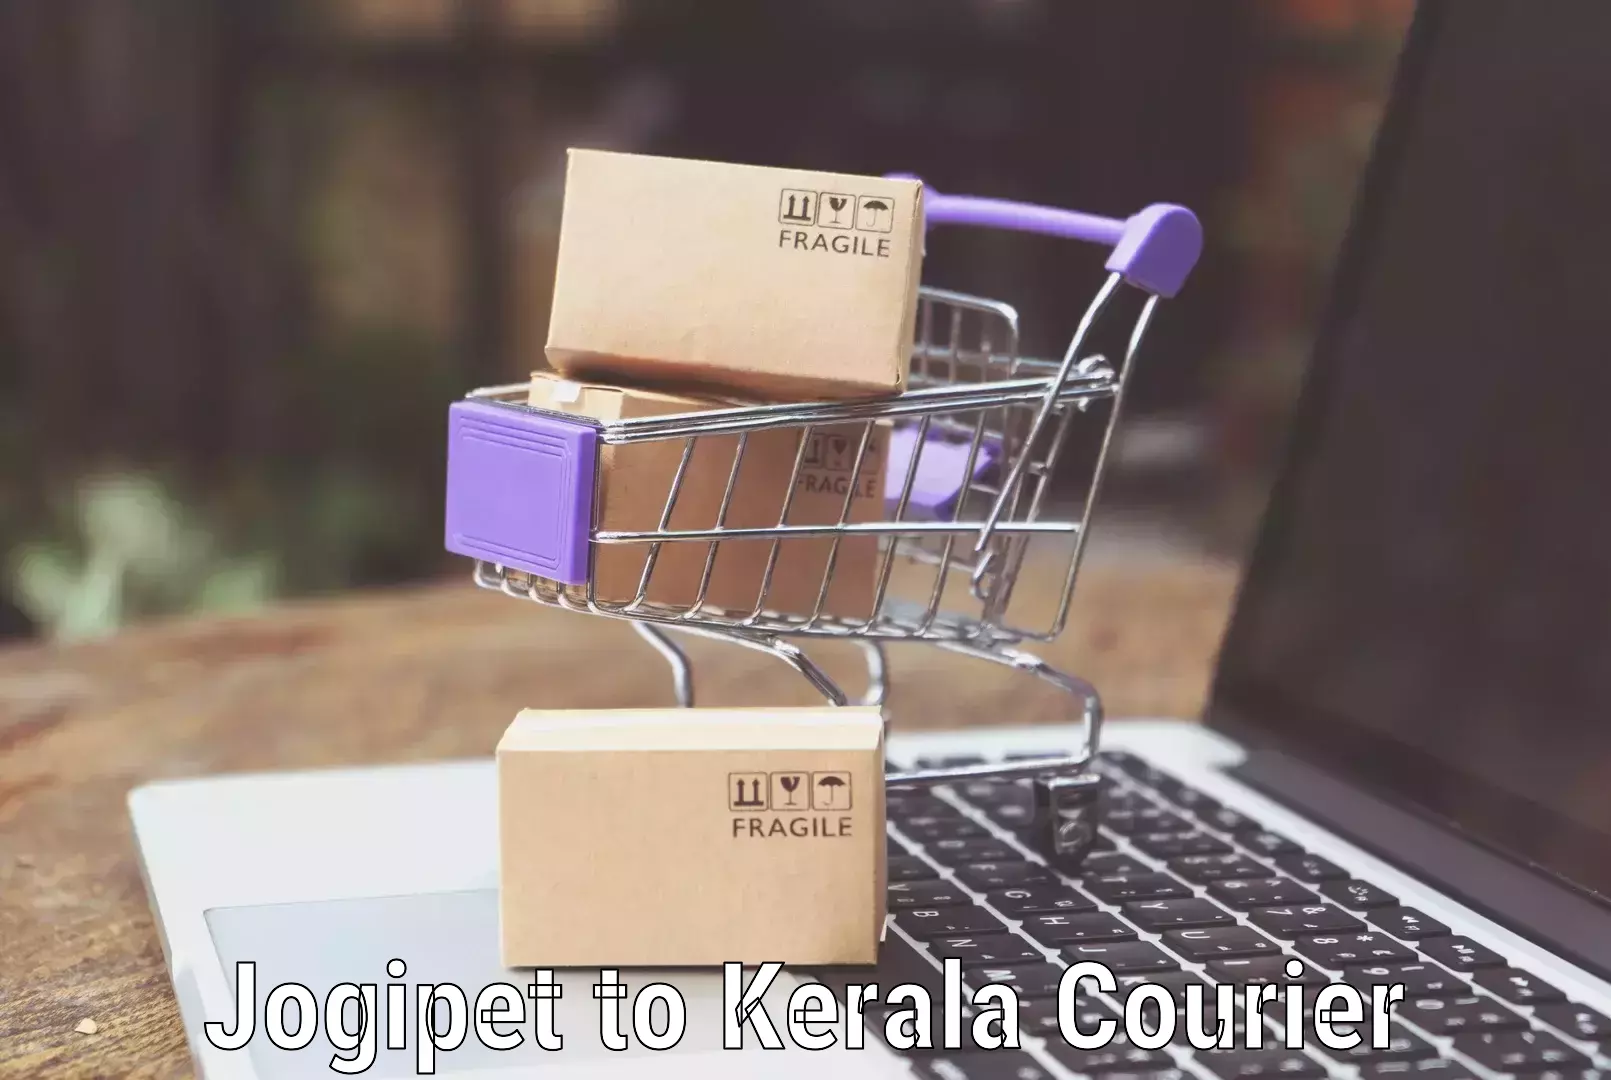 Luggage transport consultancy Jogipet to Kerala